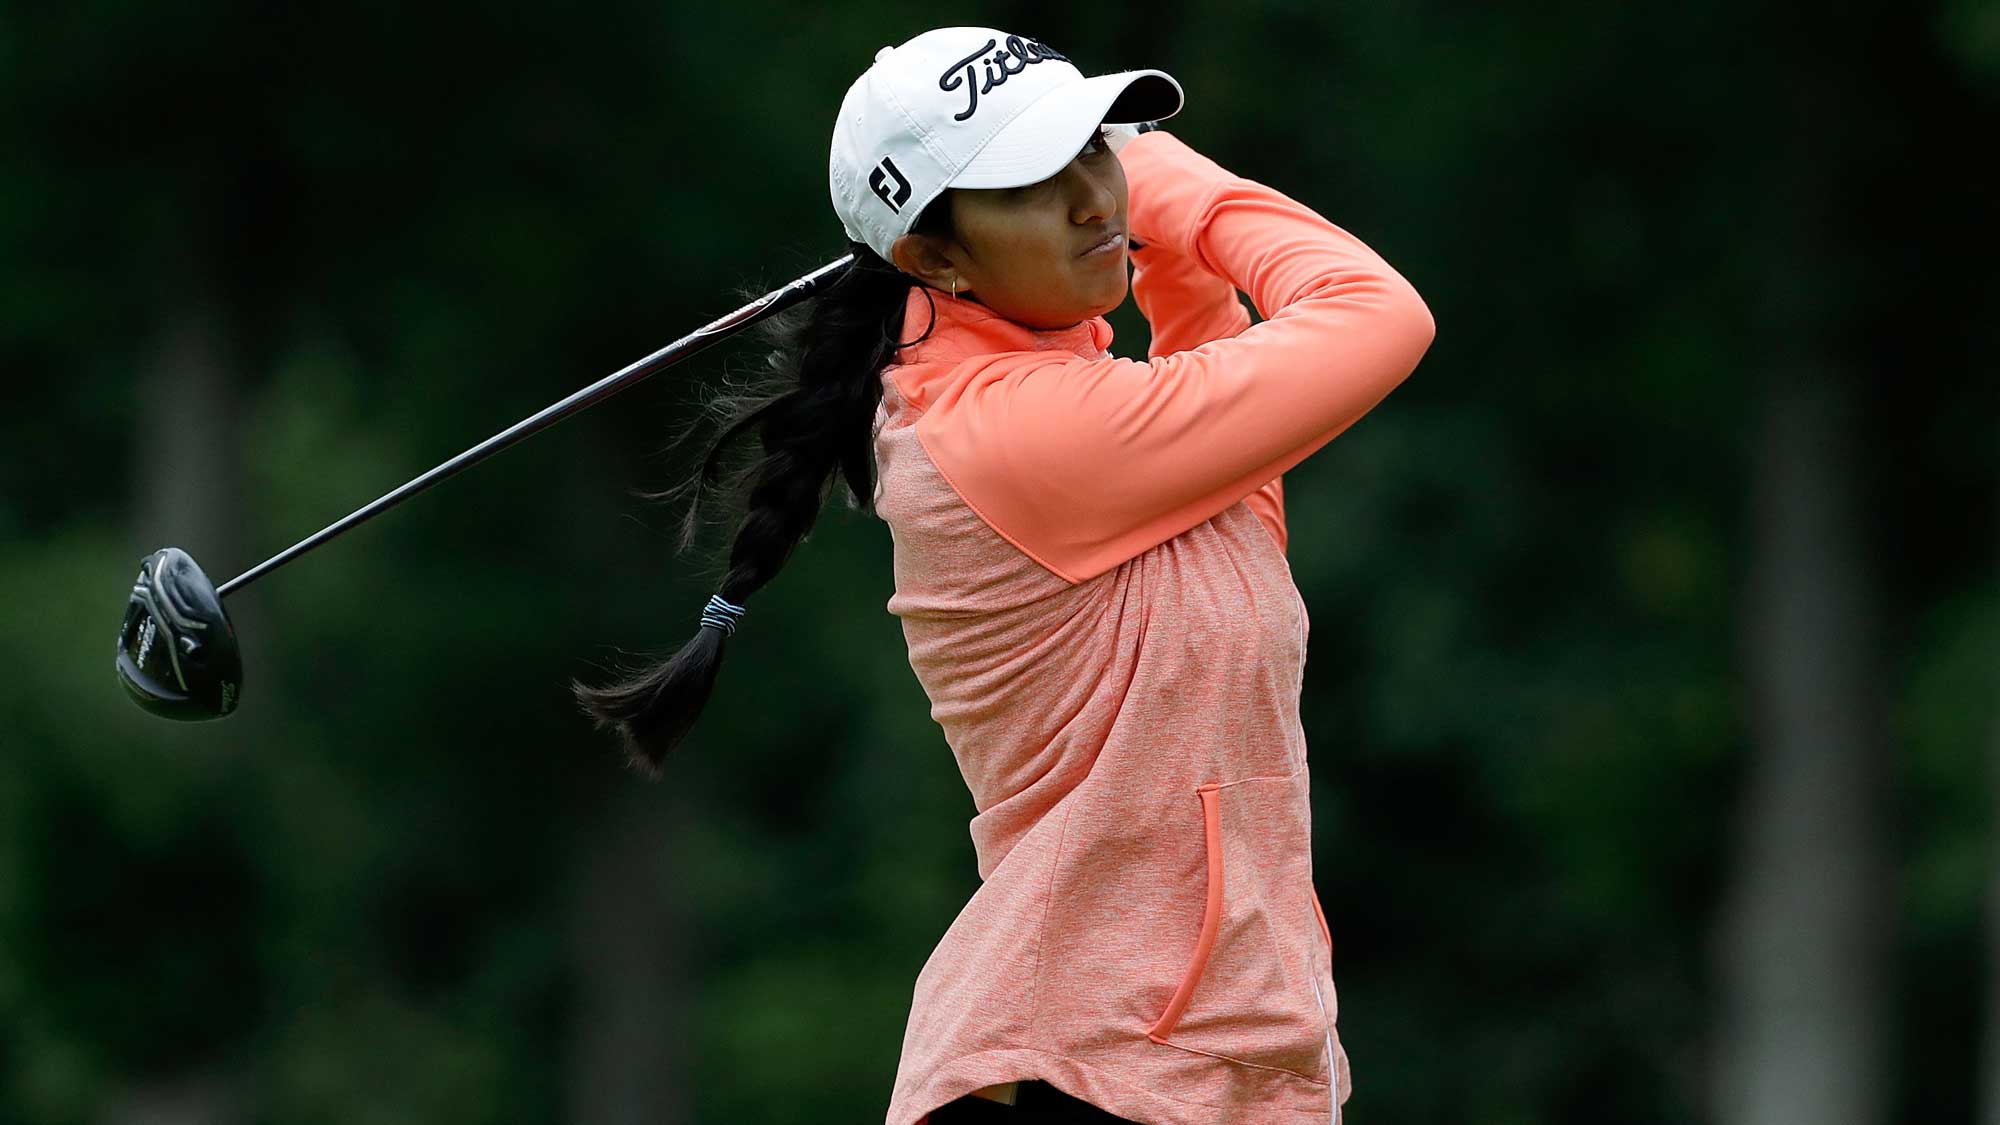 Aditi Ashok of India hits her tee shot on the sixth hole during a practice round prior to the 2017 KPMG PGA Championship